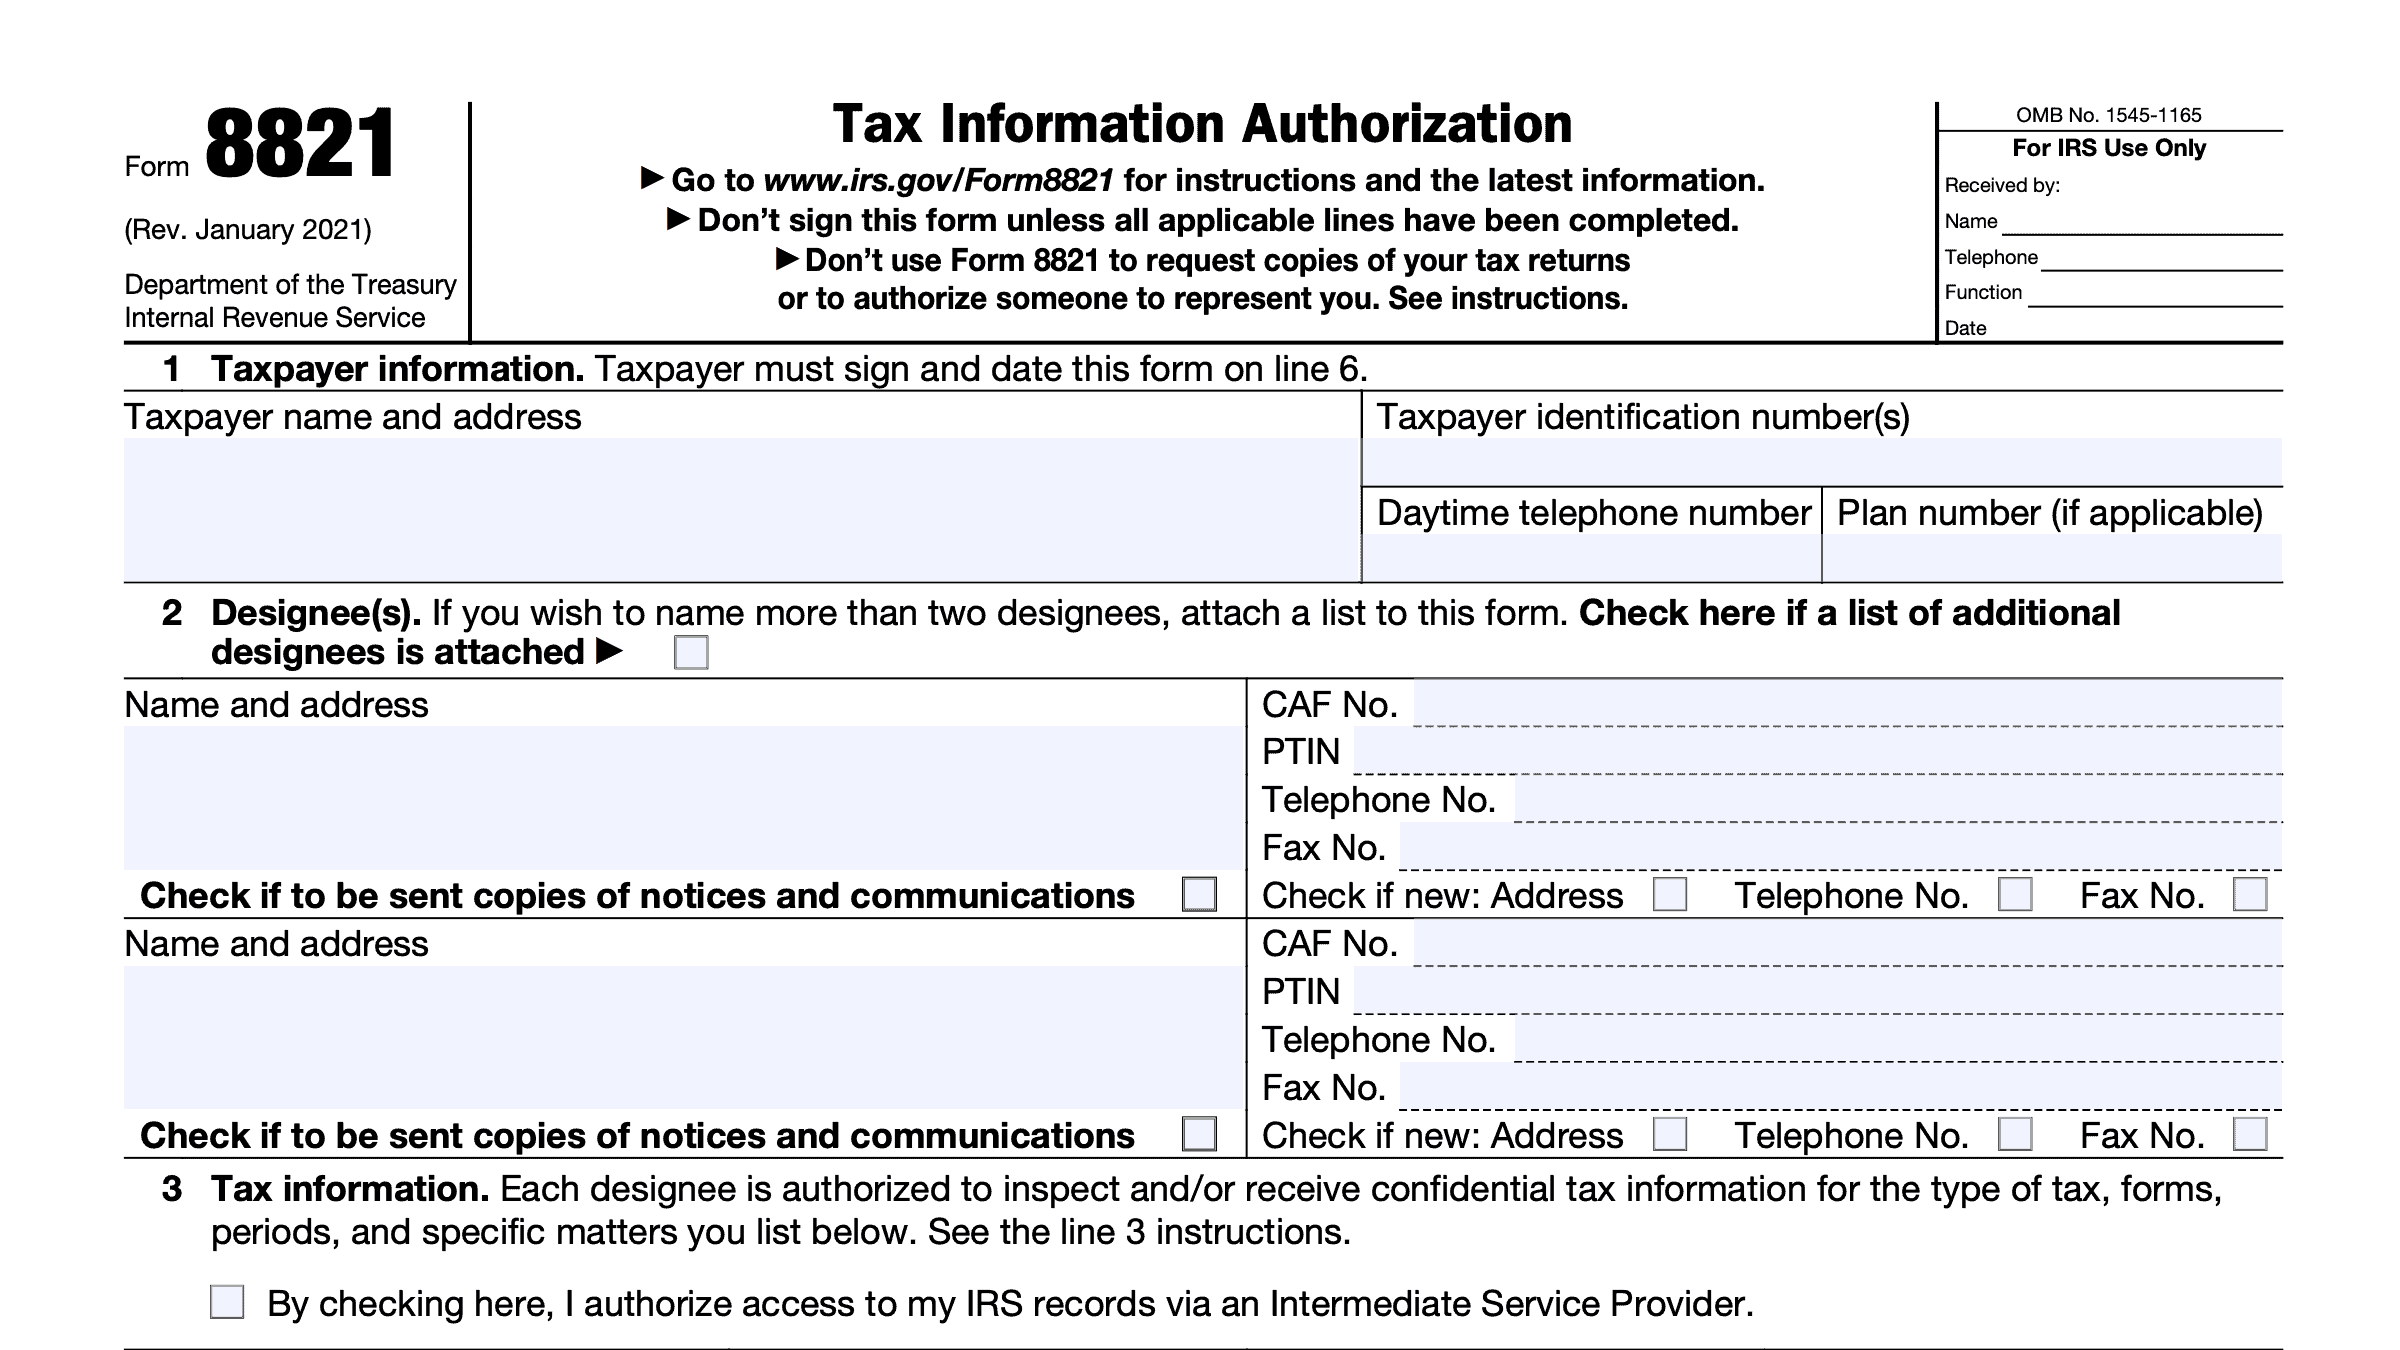 IRS Form 8821 Instructions Tax Information Authorization